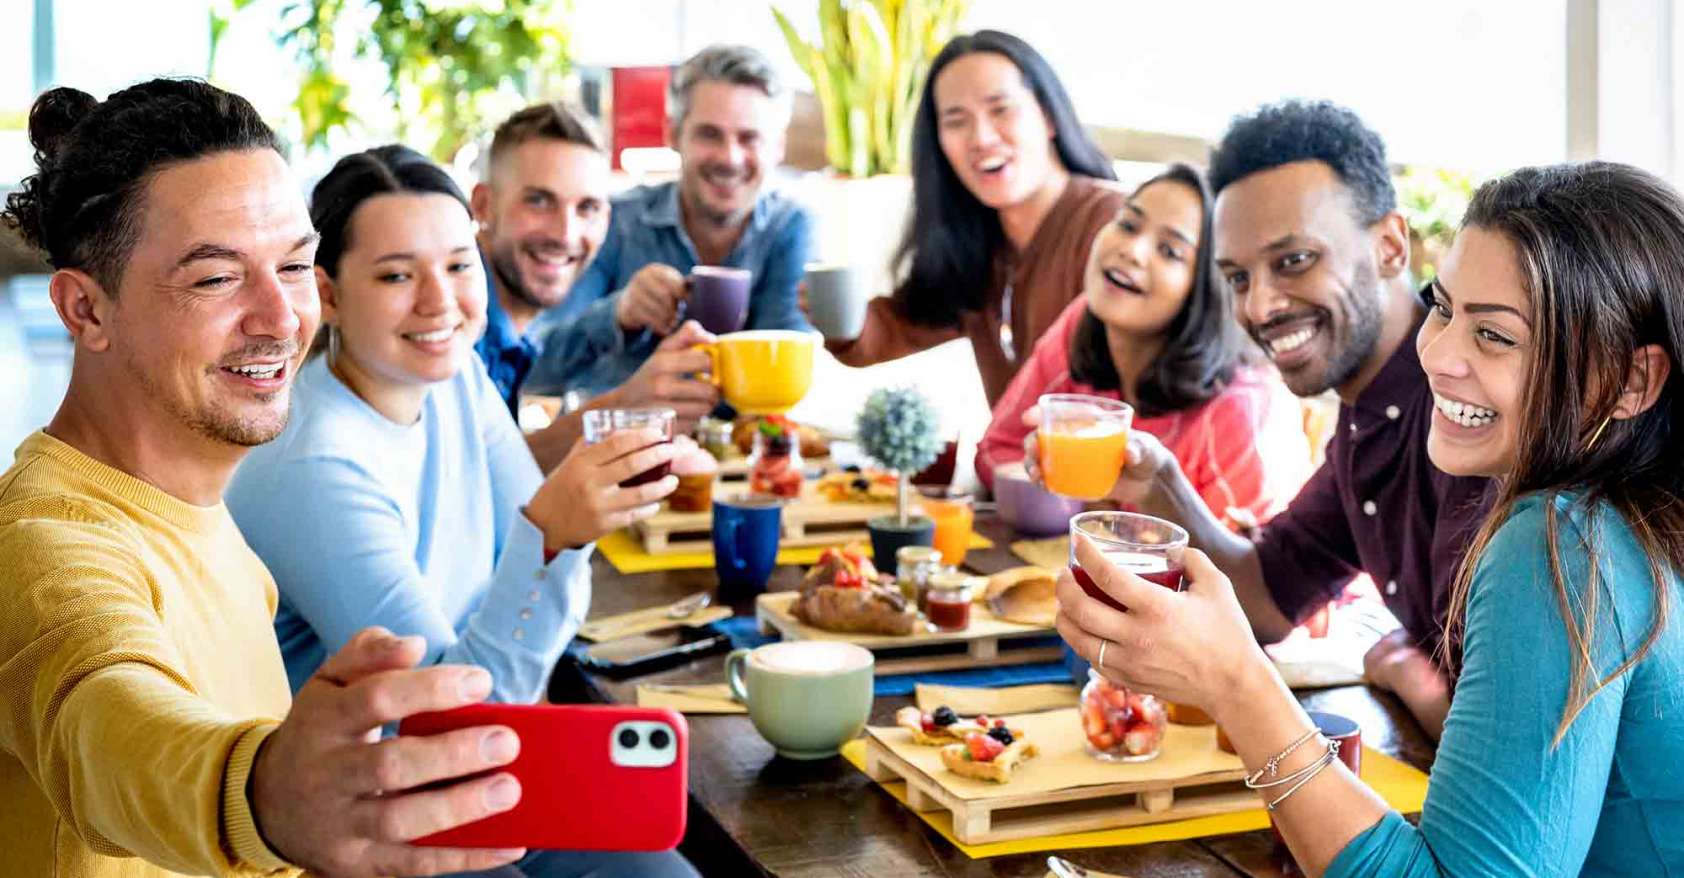 Friends taking selfie on breakfast time drinking juices and eating cakes - People having fun at fashion cafeteria - Life style concept with happy men and women at cafe bar equal eats